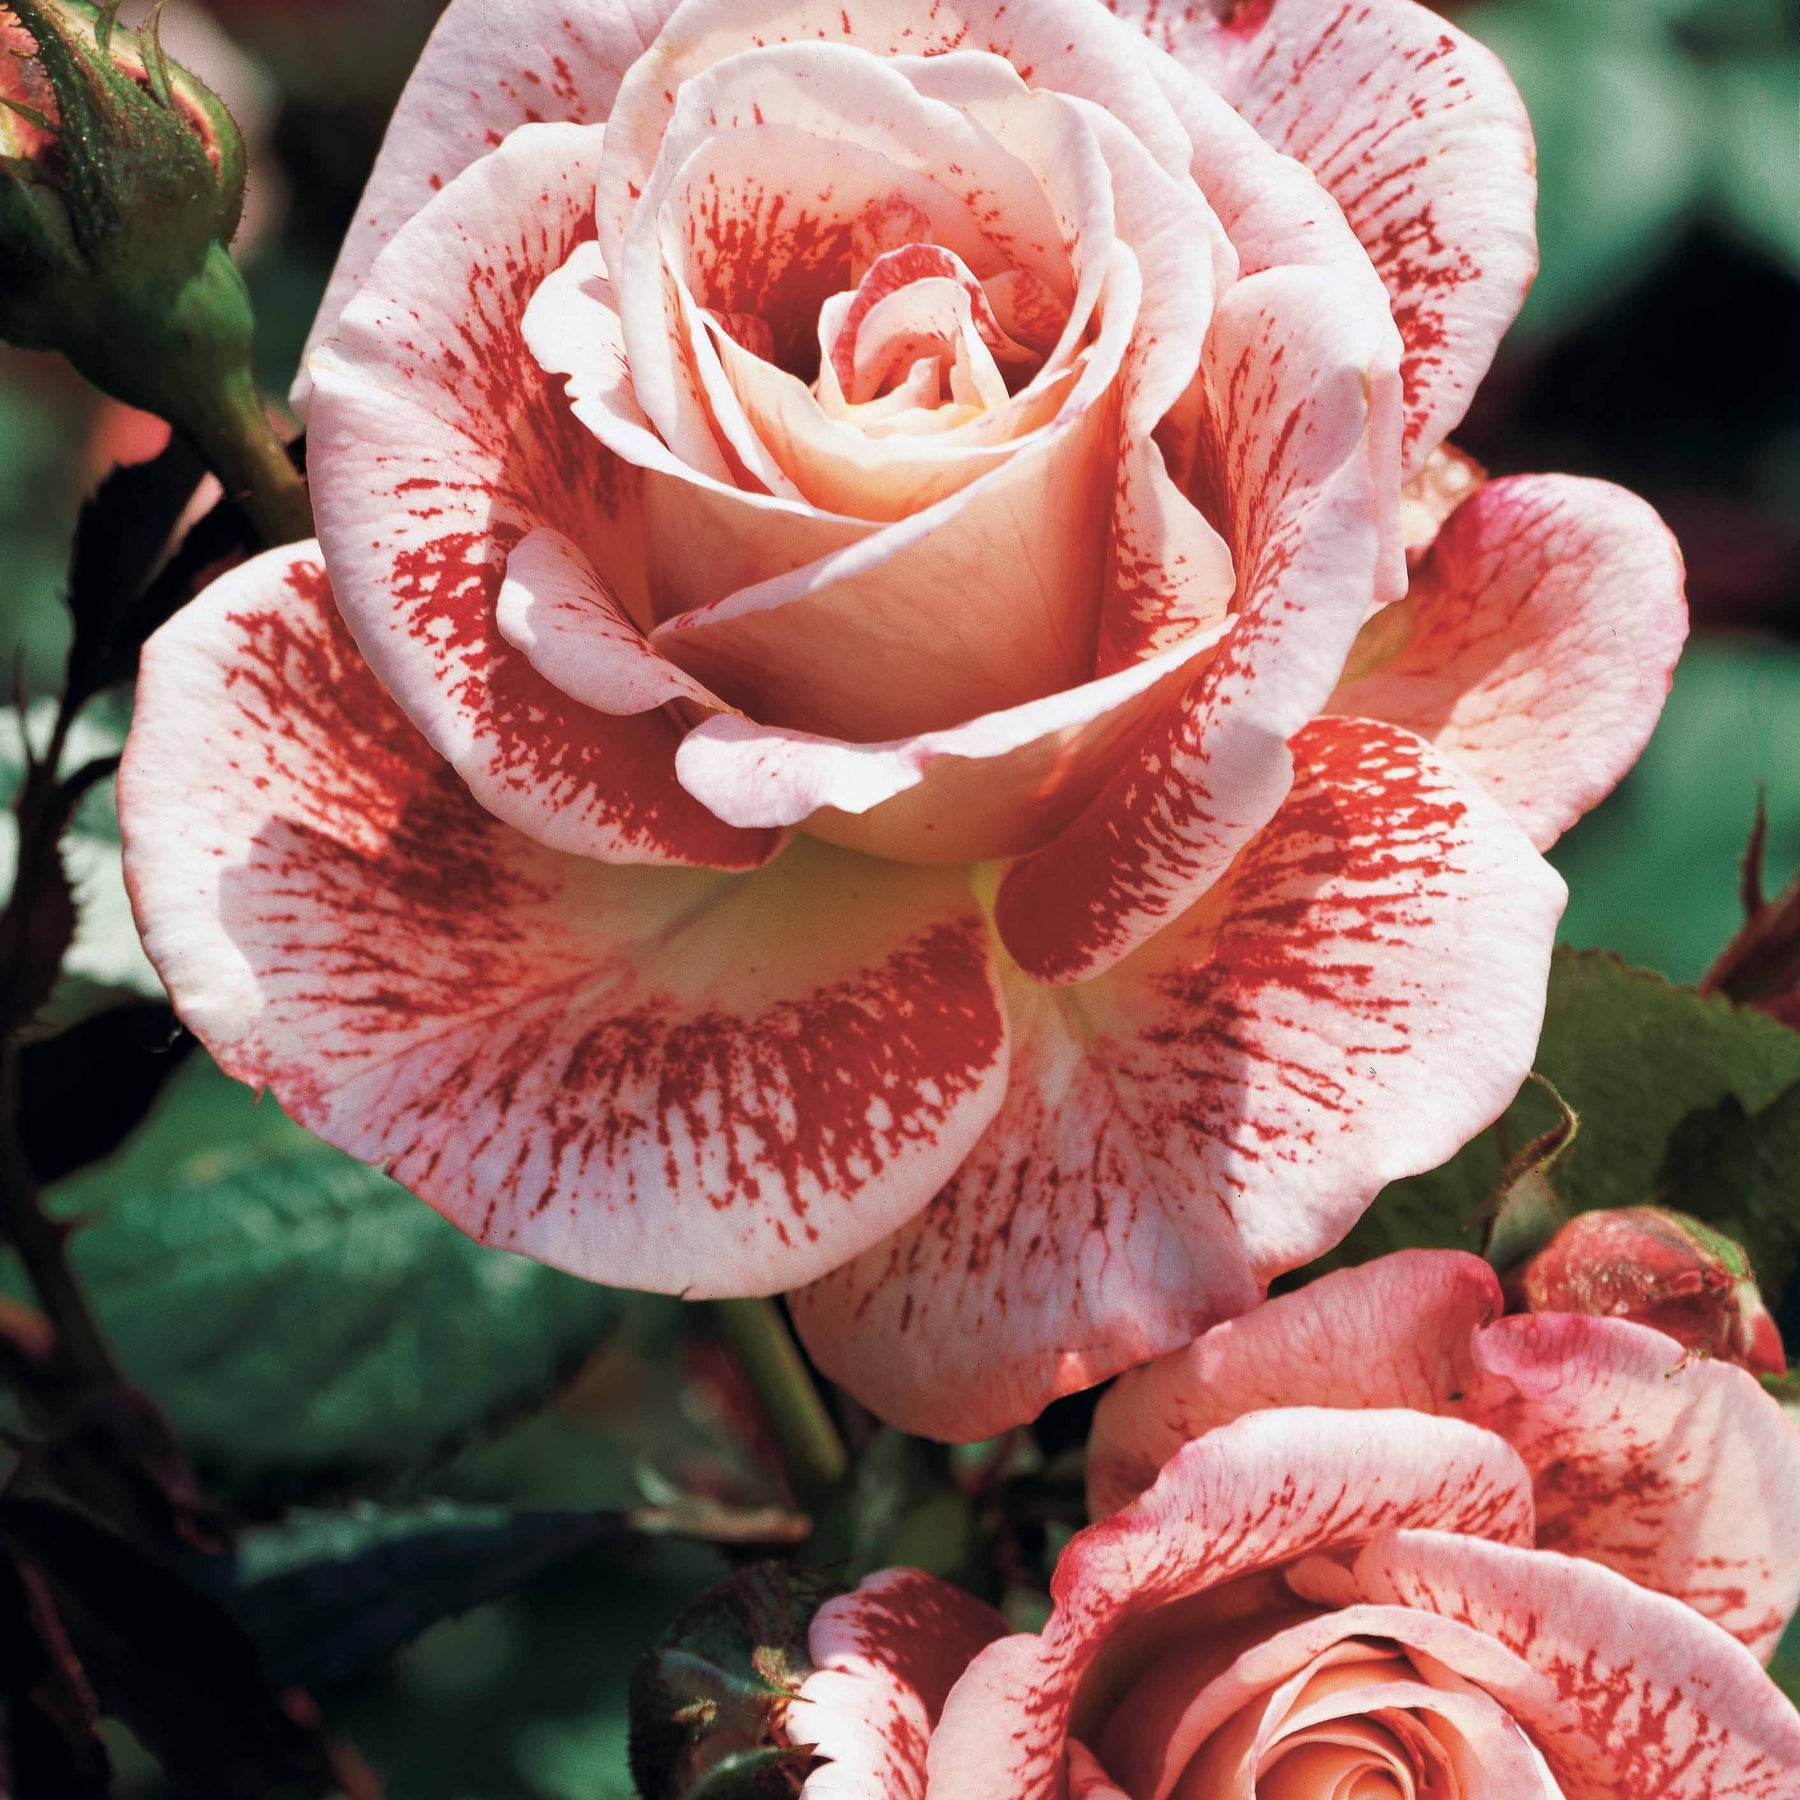 Collection de 3 Rosiers buissons : Famosa, Whisky, Double Delight - Rosa 'famosa', 'whisky', 'double delight' - Rosiers